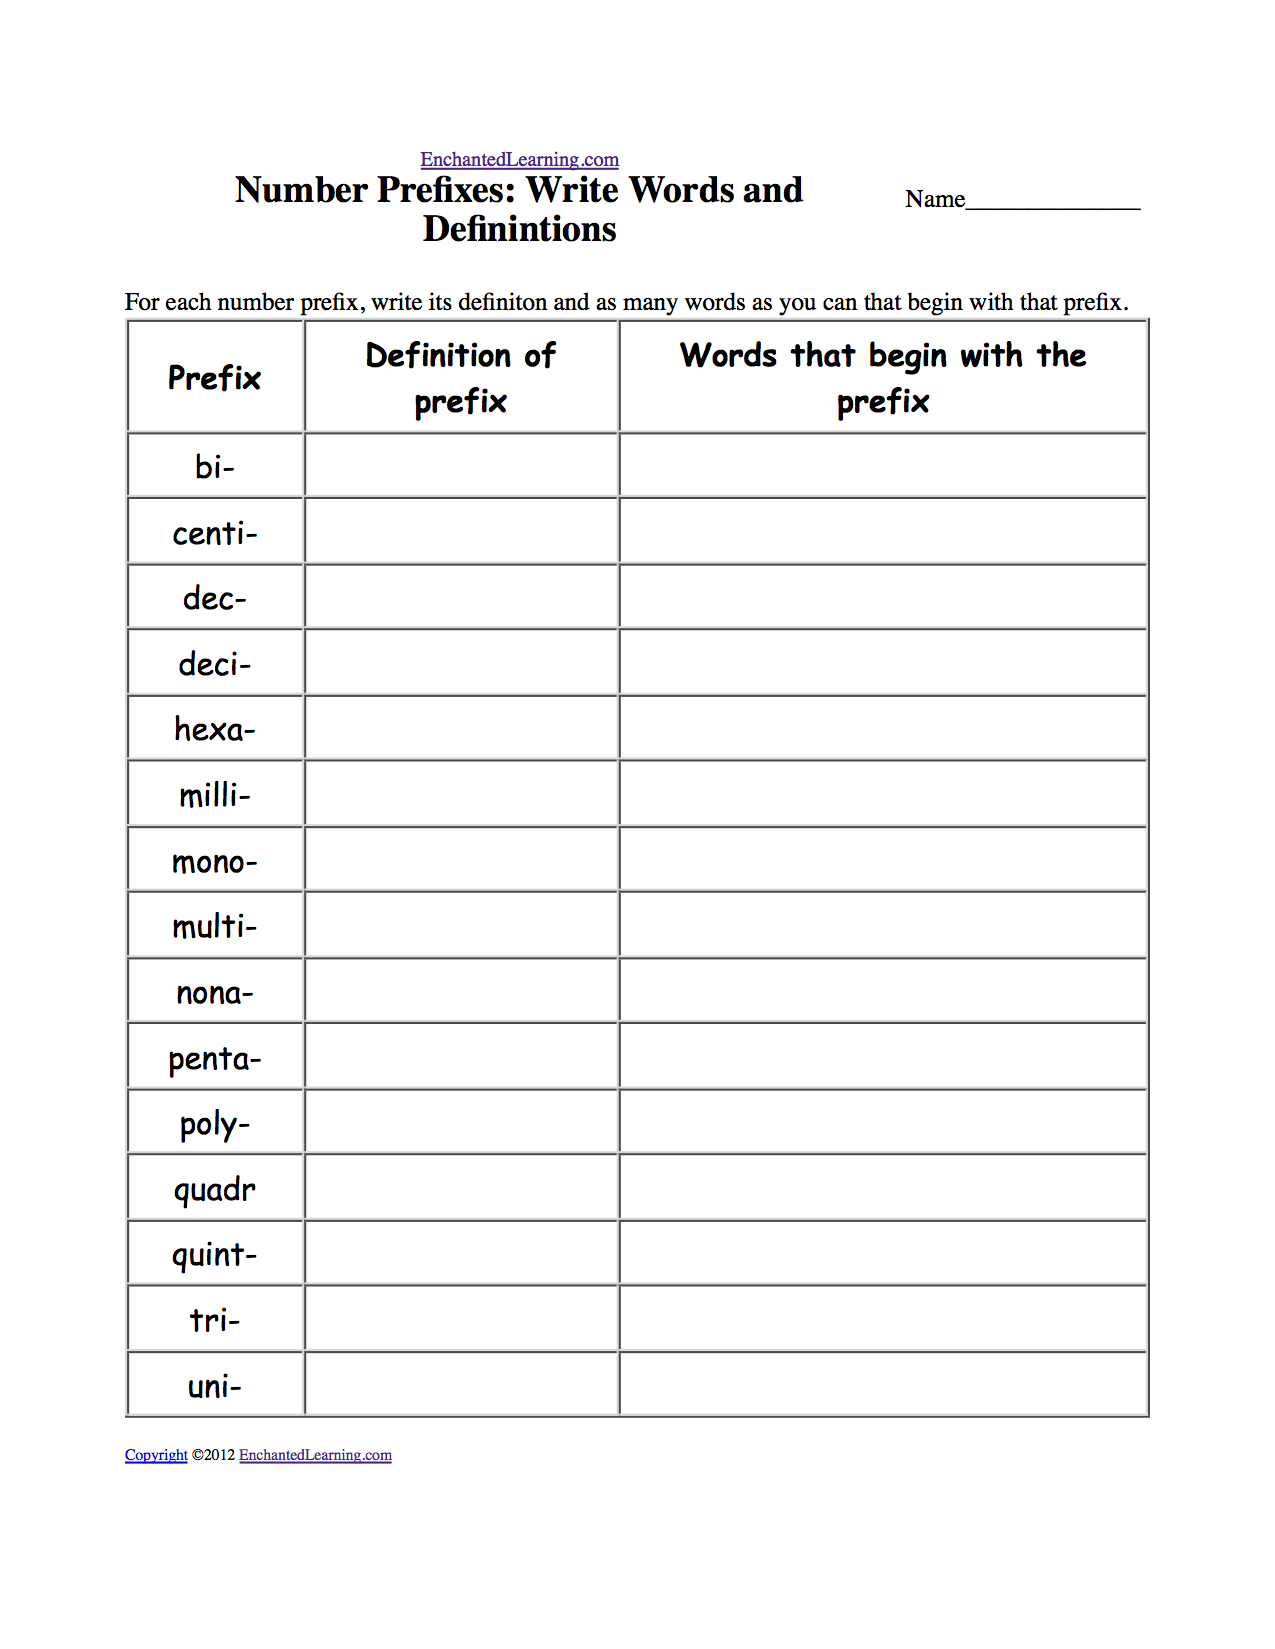 Prefixes and Suffixes - Enchanted Learning Regarding Root Words Worksheet Pdf